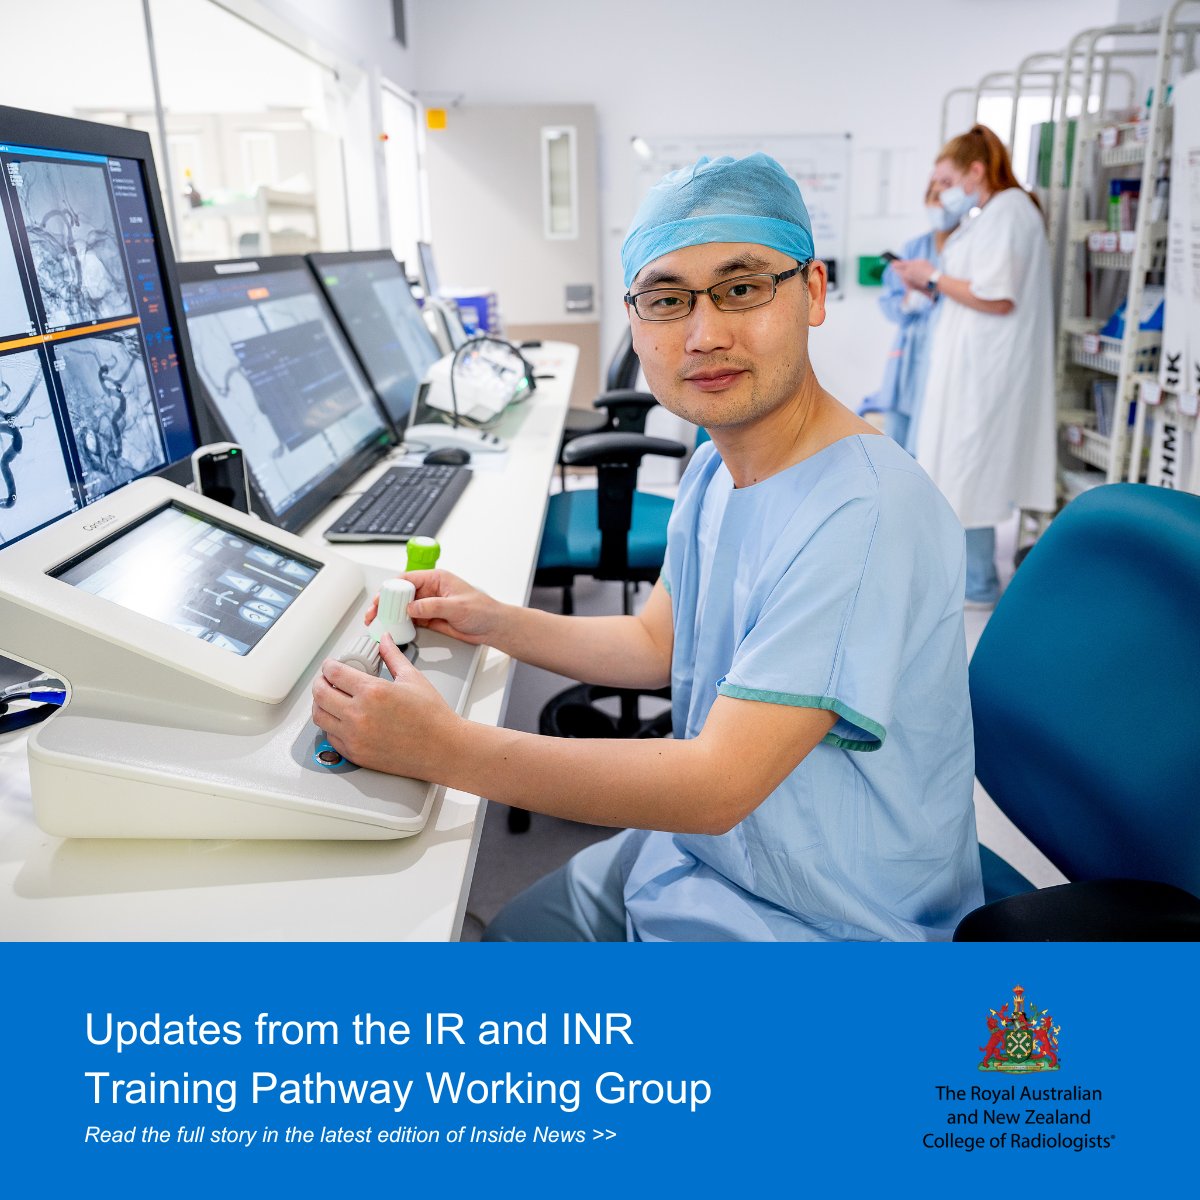 The IR and INR Training Pathway Working Group, under the direction of the College's Interventional Radiology Committee, is developing two dedicated training programs for interventional radiology and interventional neuroradiology. Learn more: ow.ly/CIf050QZ8Uz #RANZCR